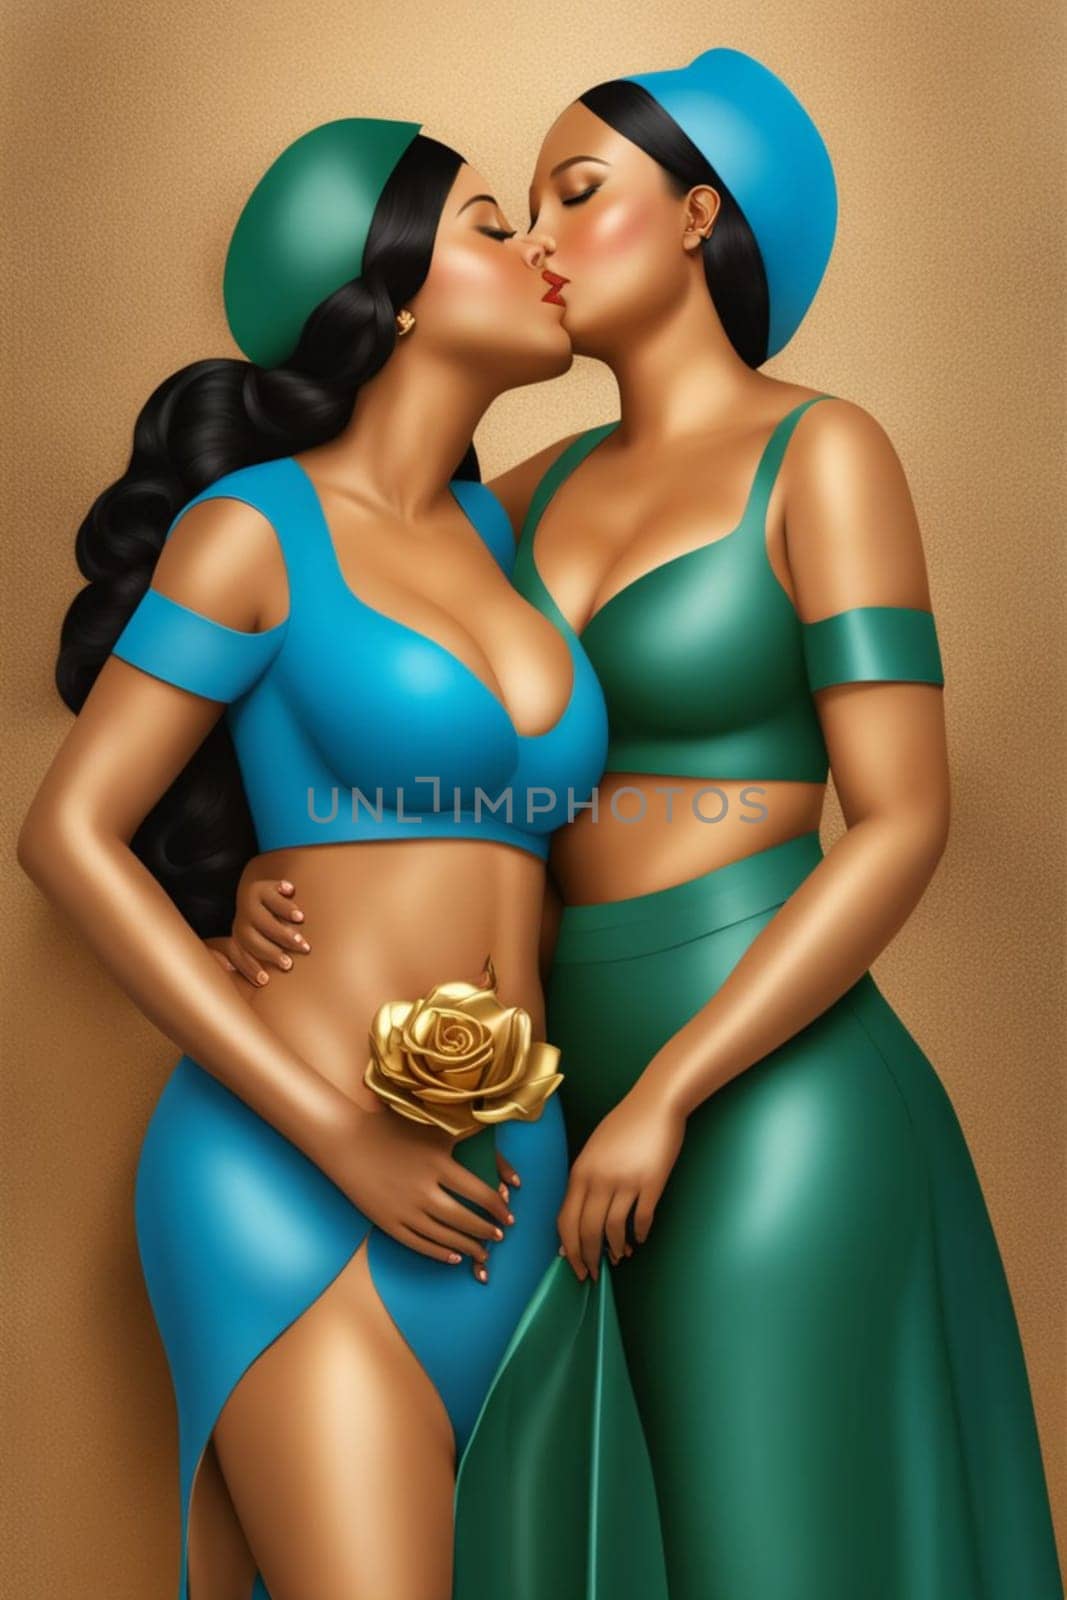 fashion portrait of modern empowered mixed race women in love illustration , blue, copper and pastel tones